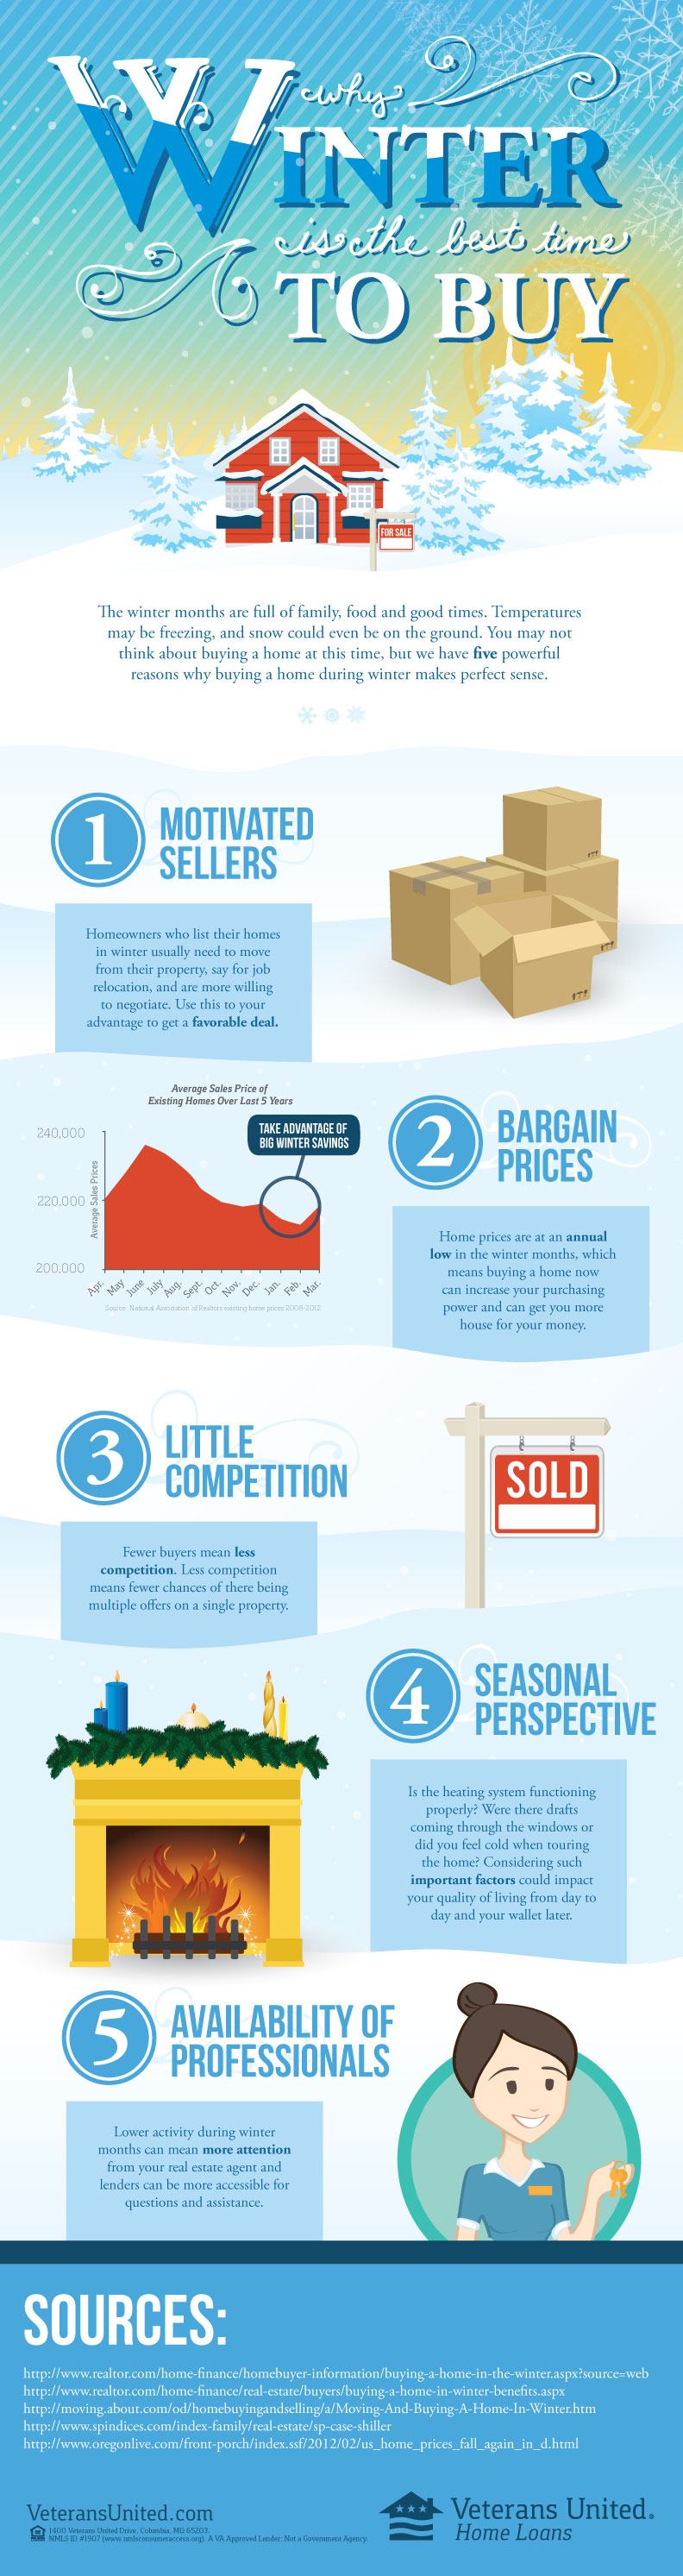 Winter-Buying-Guide-Infographic-Eastland-Construction